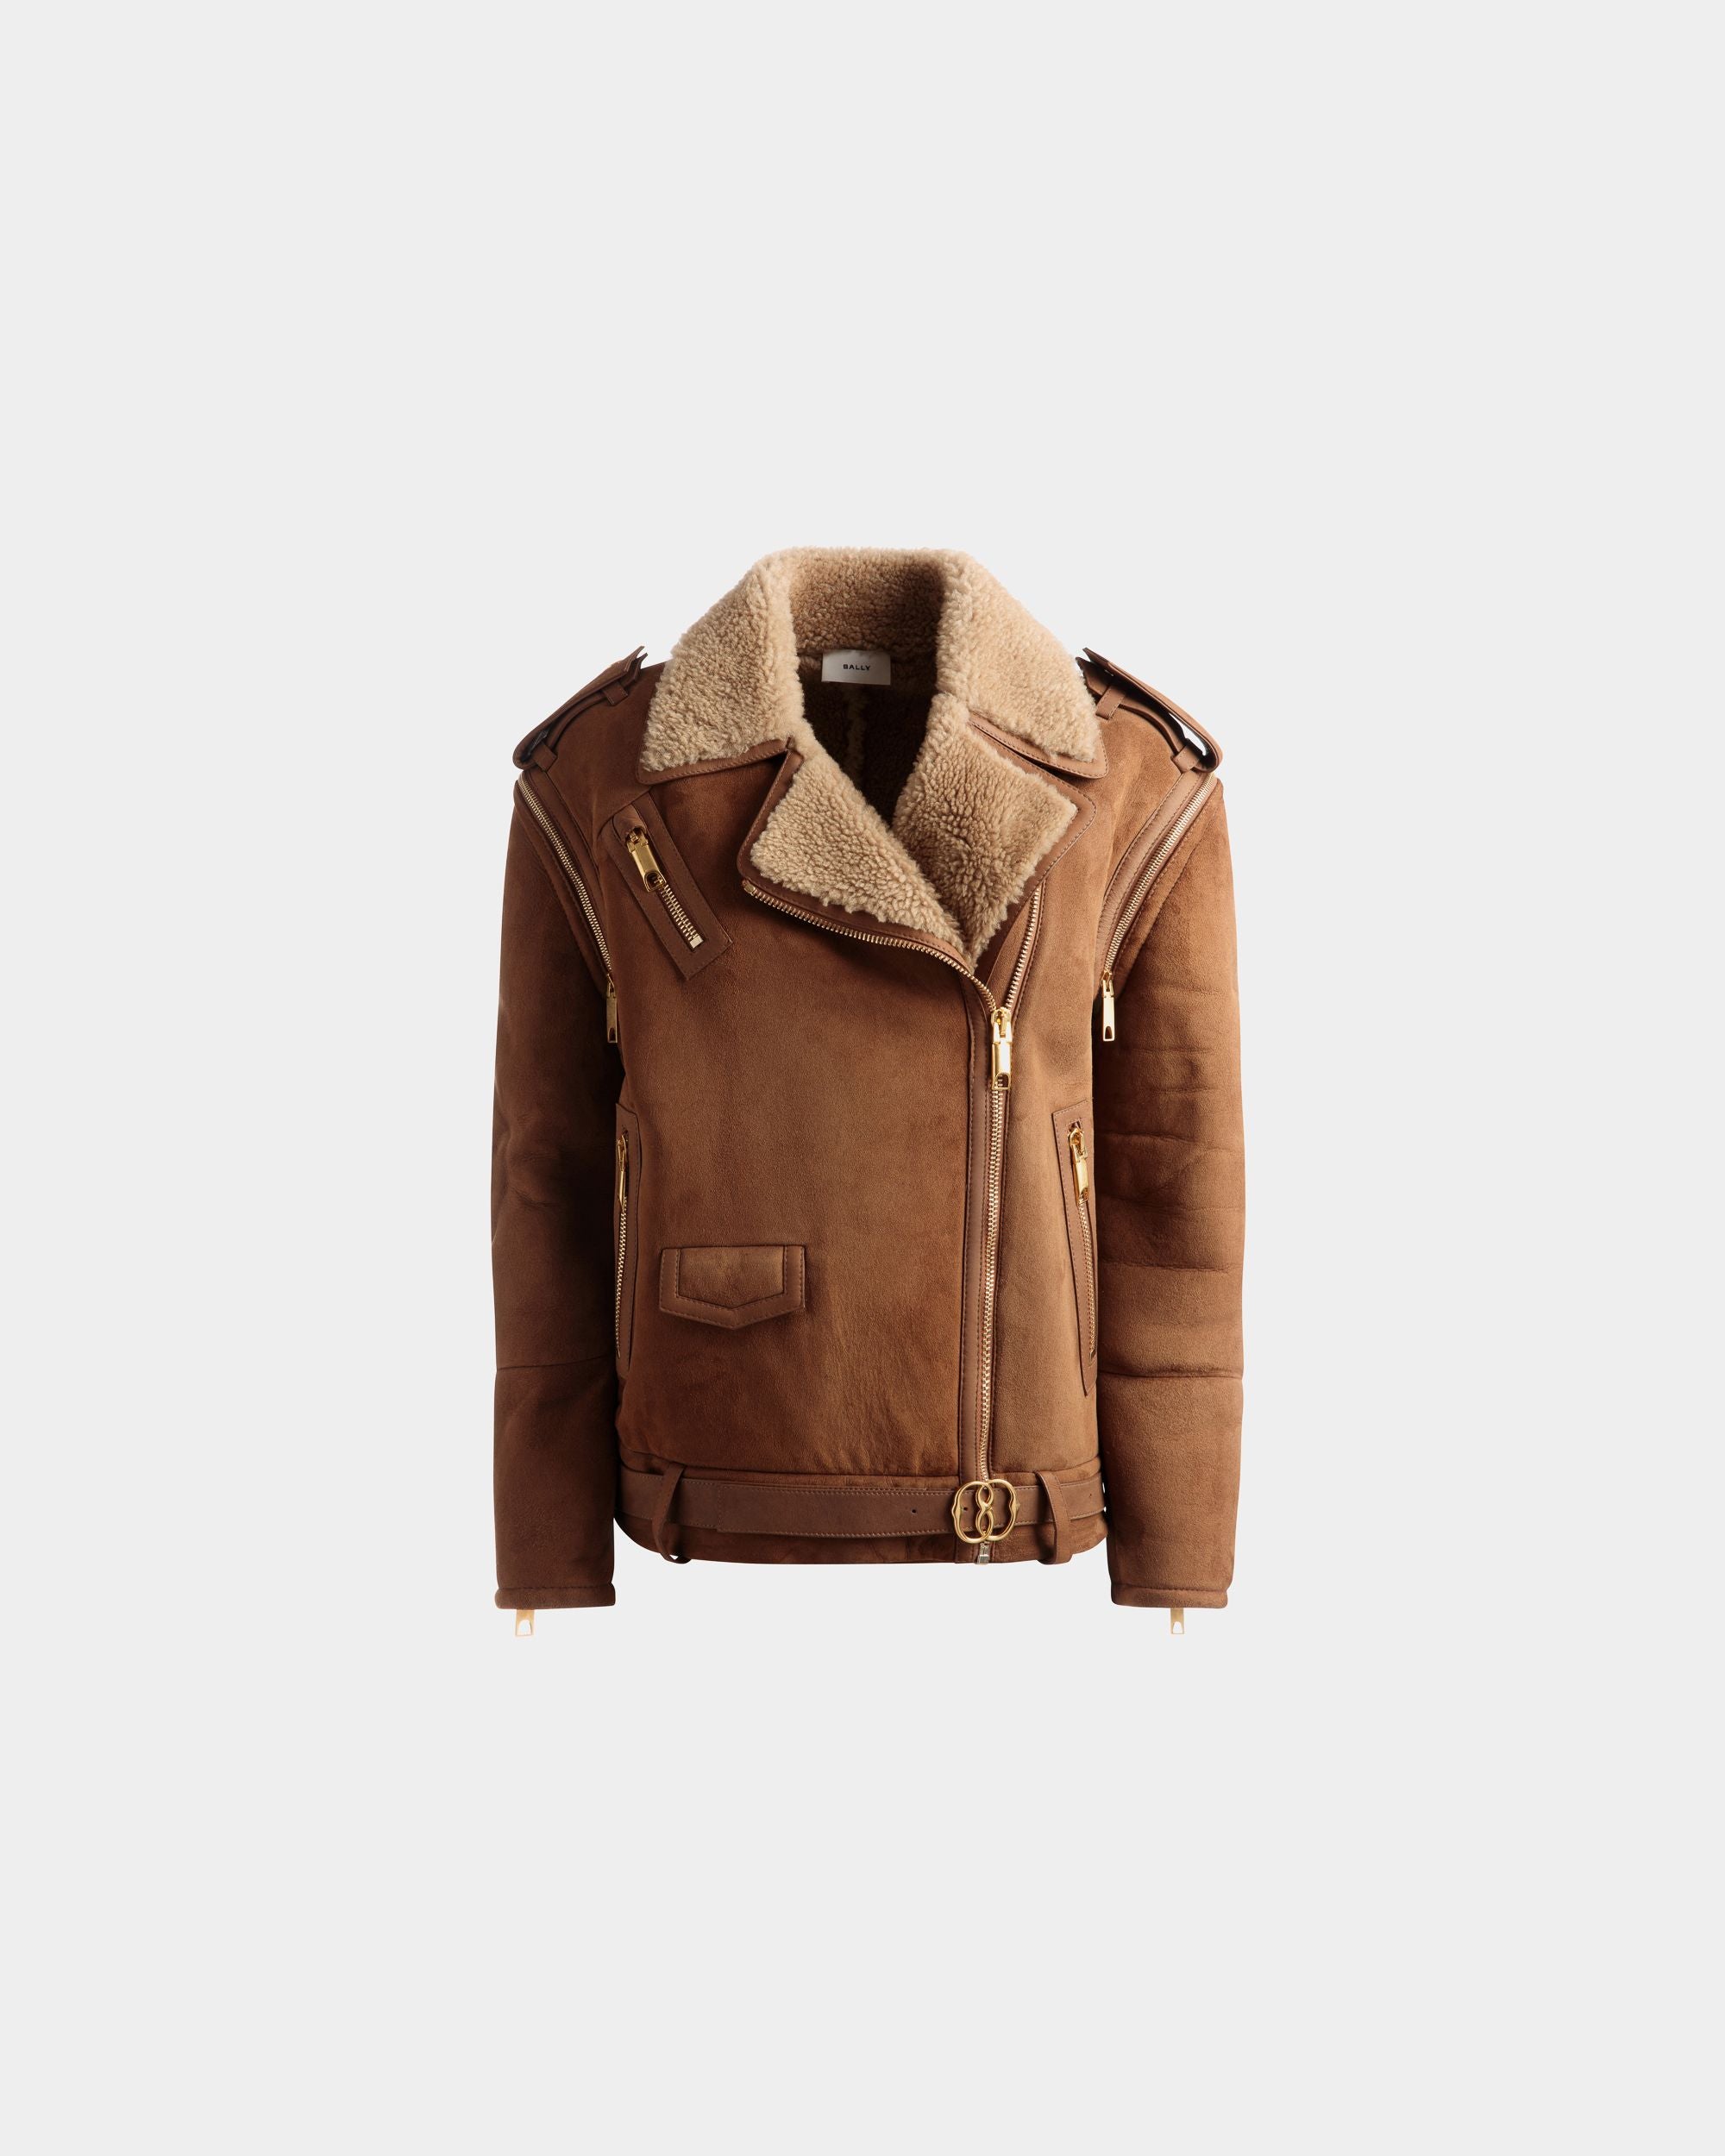 Double Breasted Shearling Jacket | Women's Outerwear | Brown Suede | Bally | Still Life Front